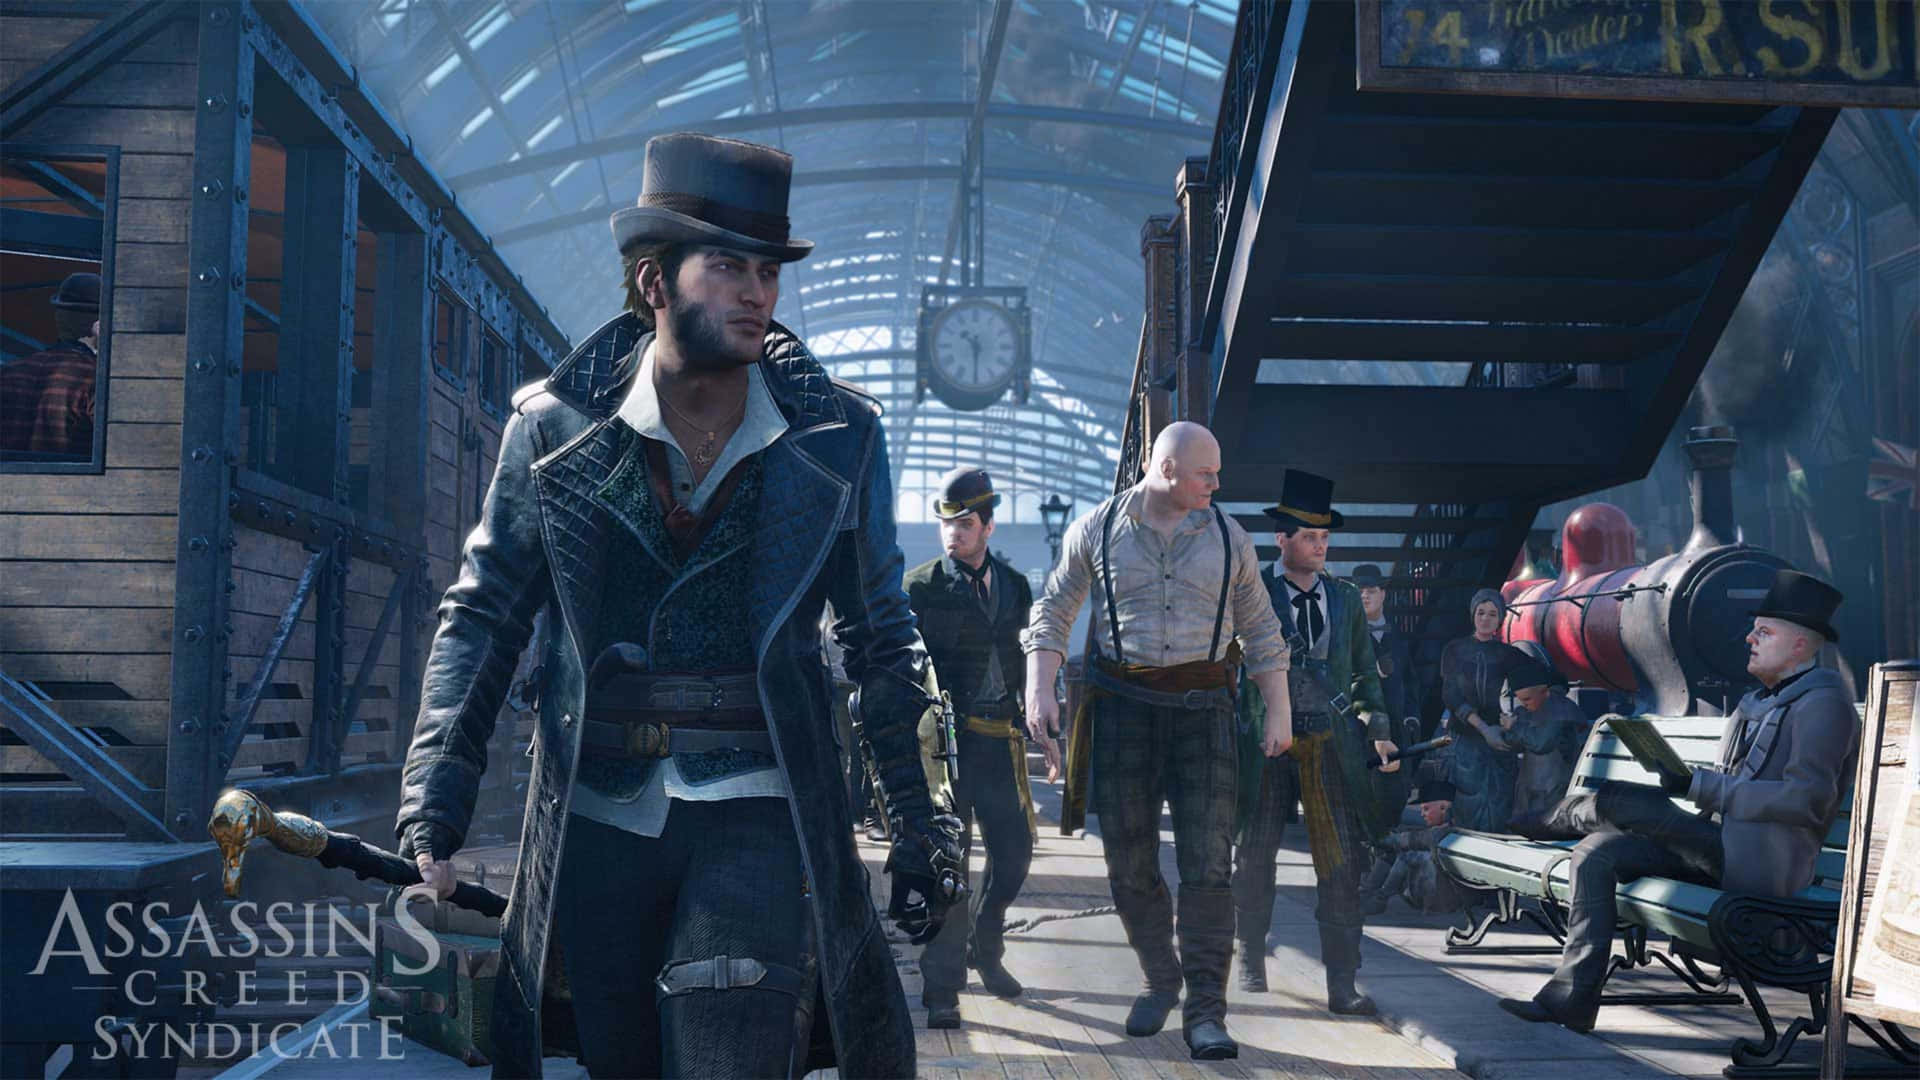 Assassin's Creed Syndicate - London's Rooftop Battle Wallpaper